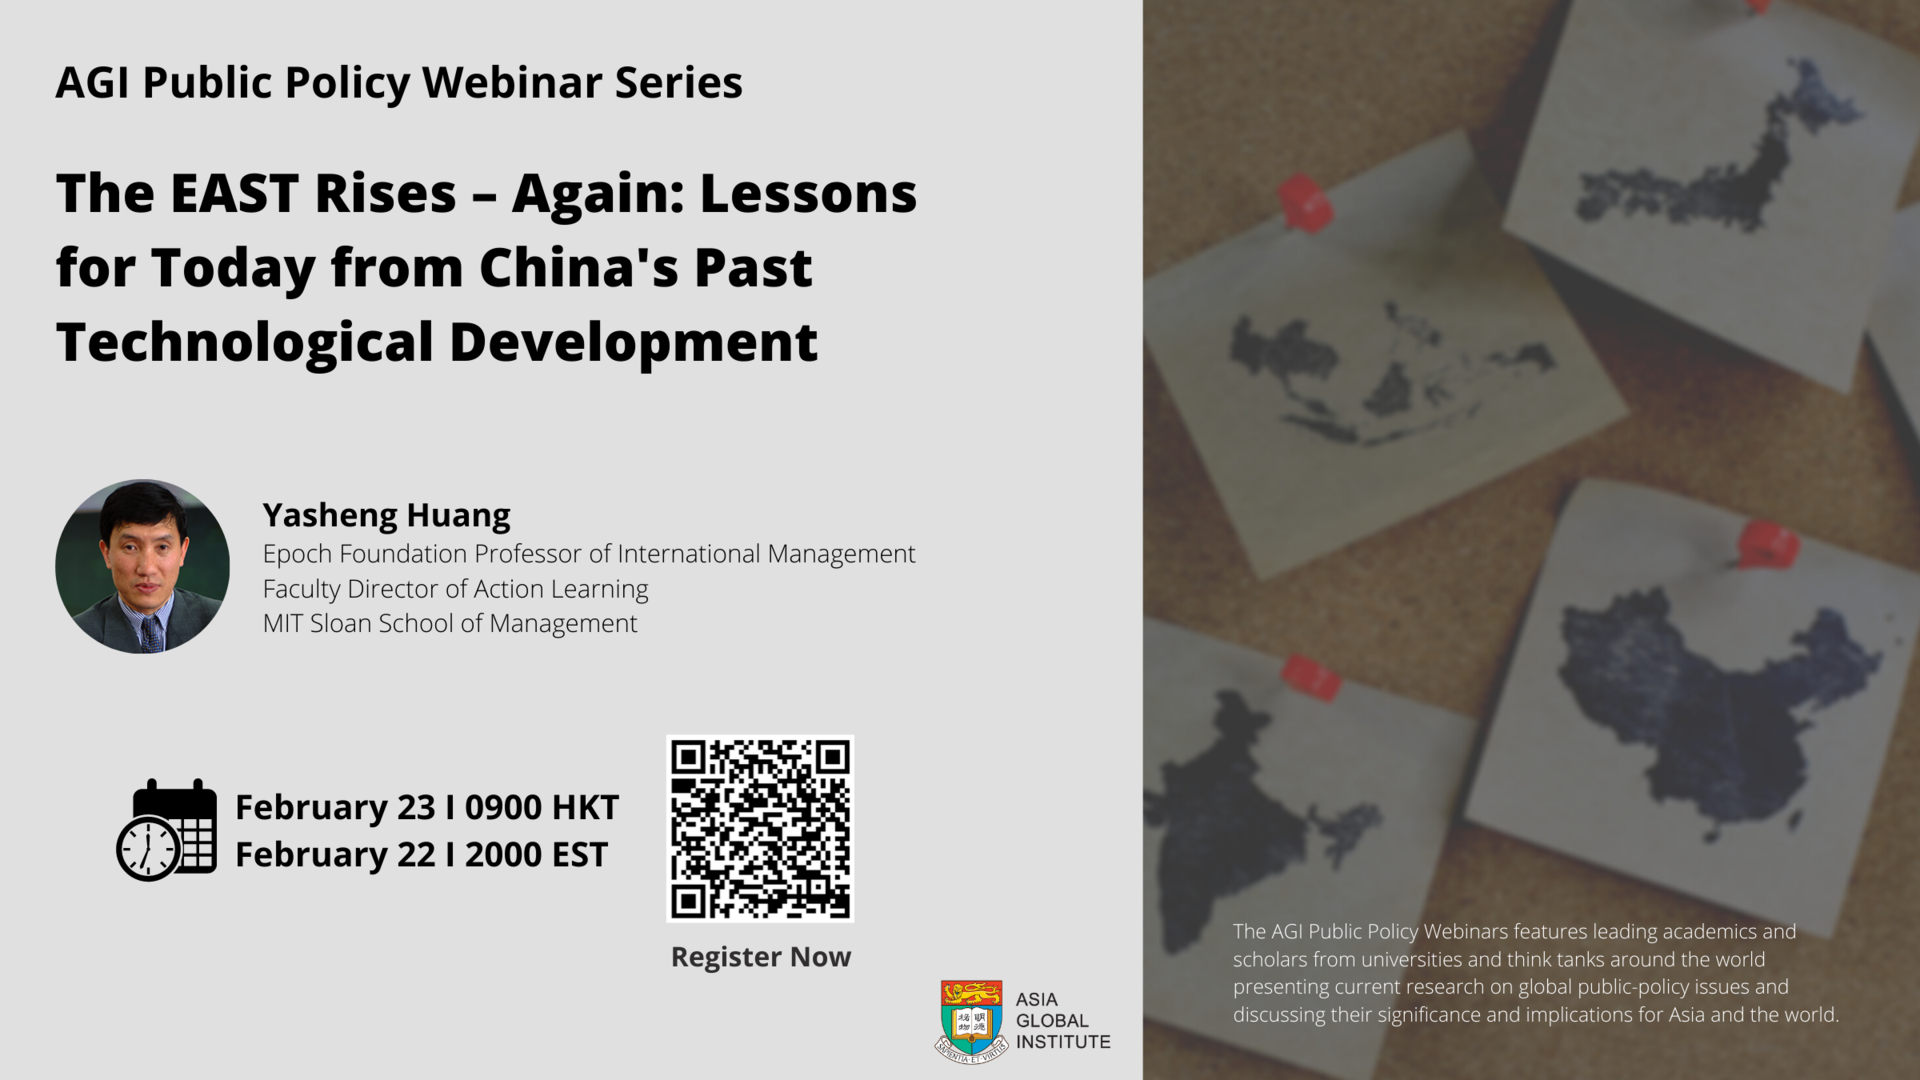 AGI Public Policy Webinar: The EAST Rises - Again: Lessons for Today from China's Past Technological Development